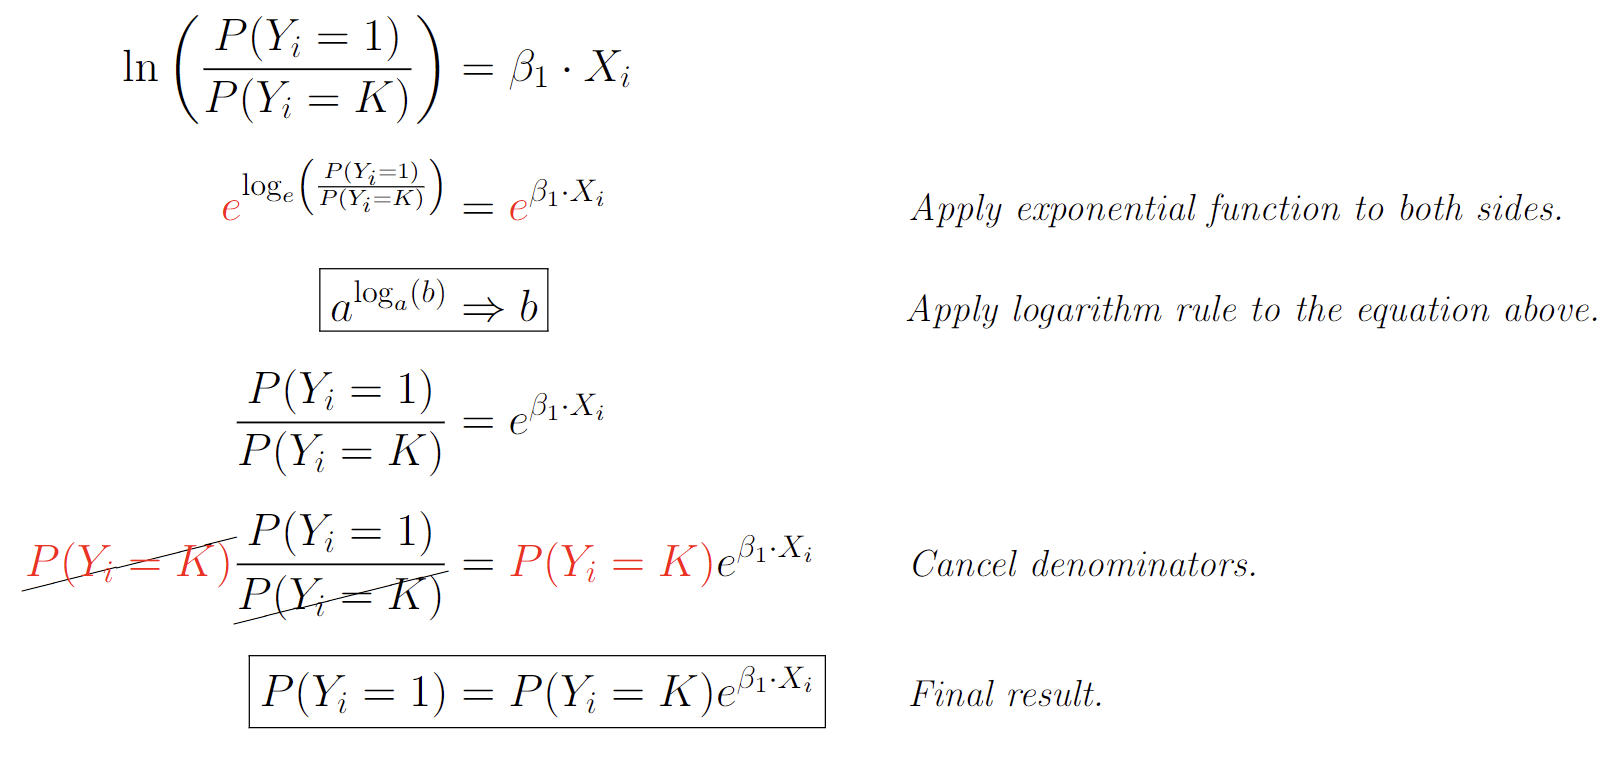 Probability equations after exponentiation.